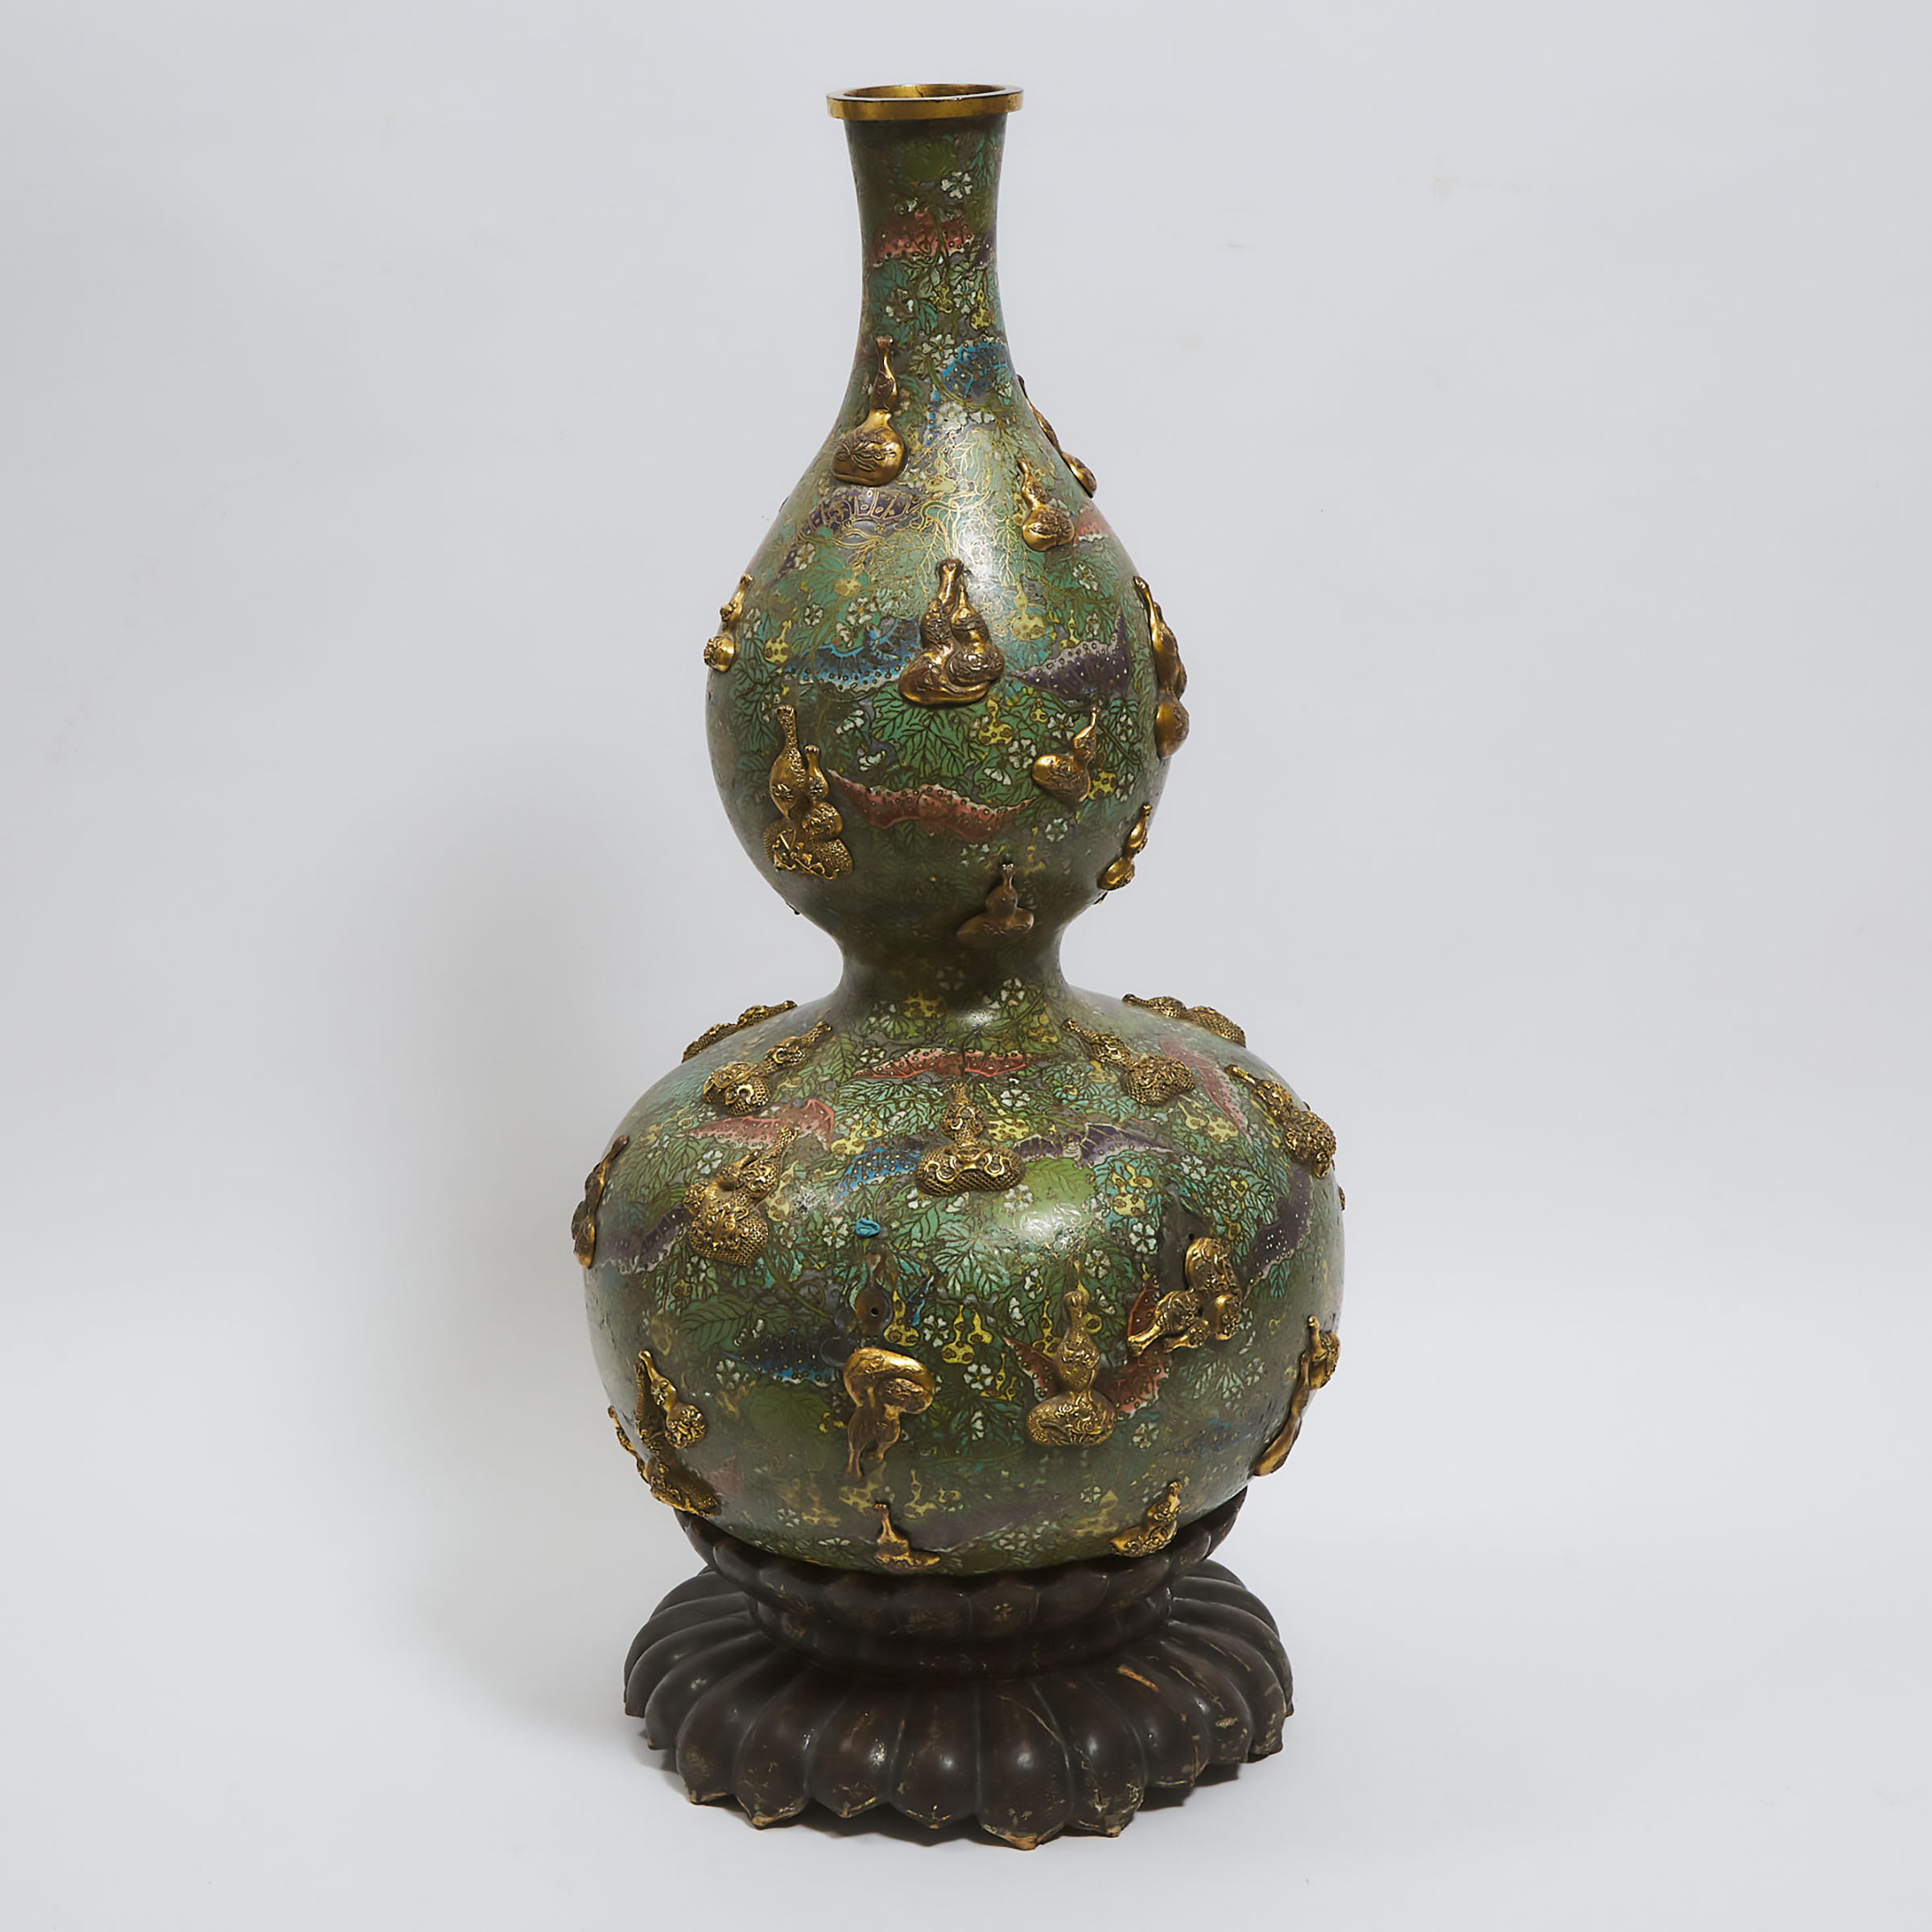 A Large Cloisonné Enameled and Gilt Bronze-Inlaid Double-Gourd Vase, 18th/19th Century